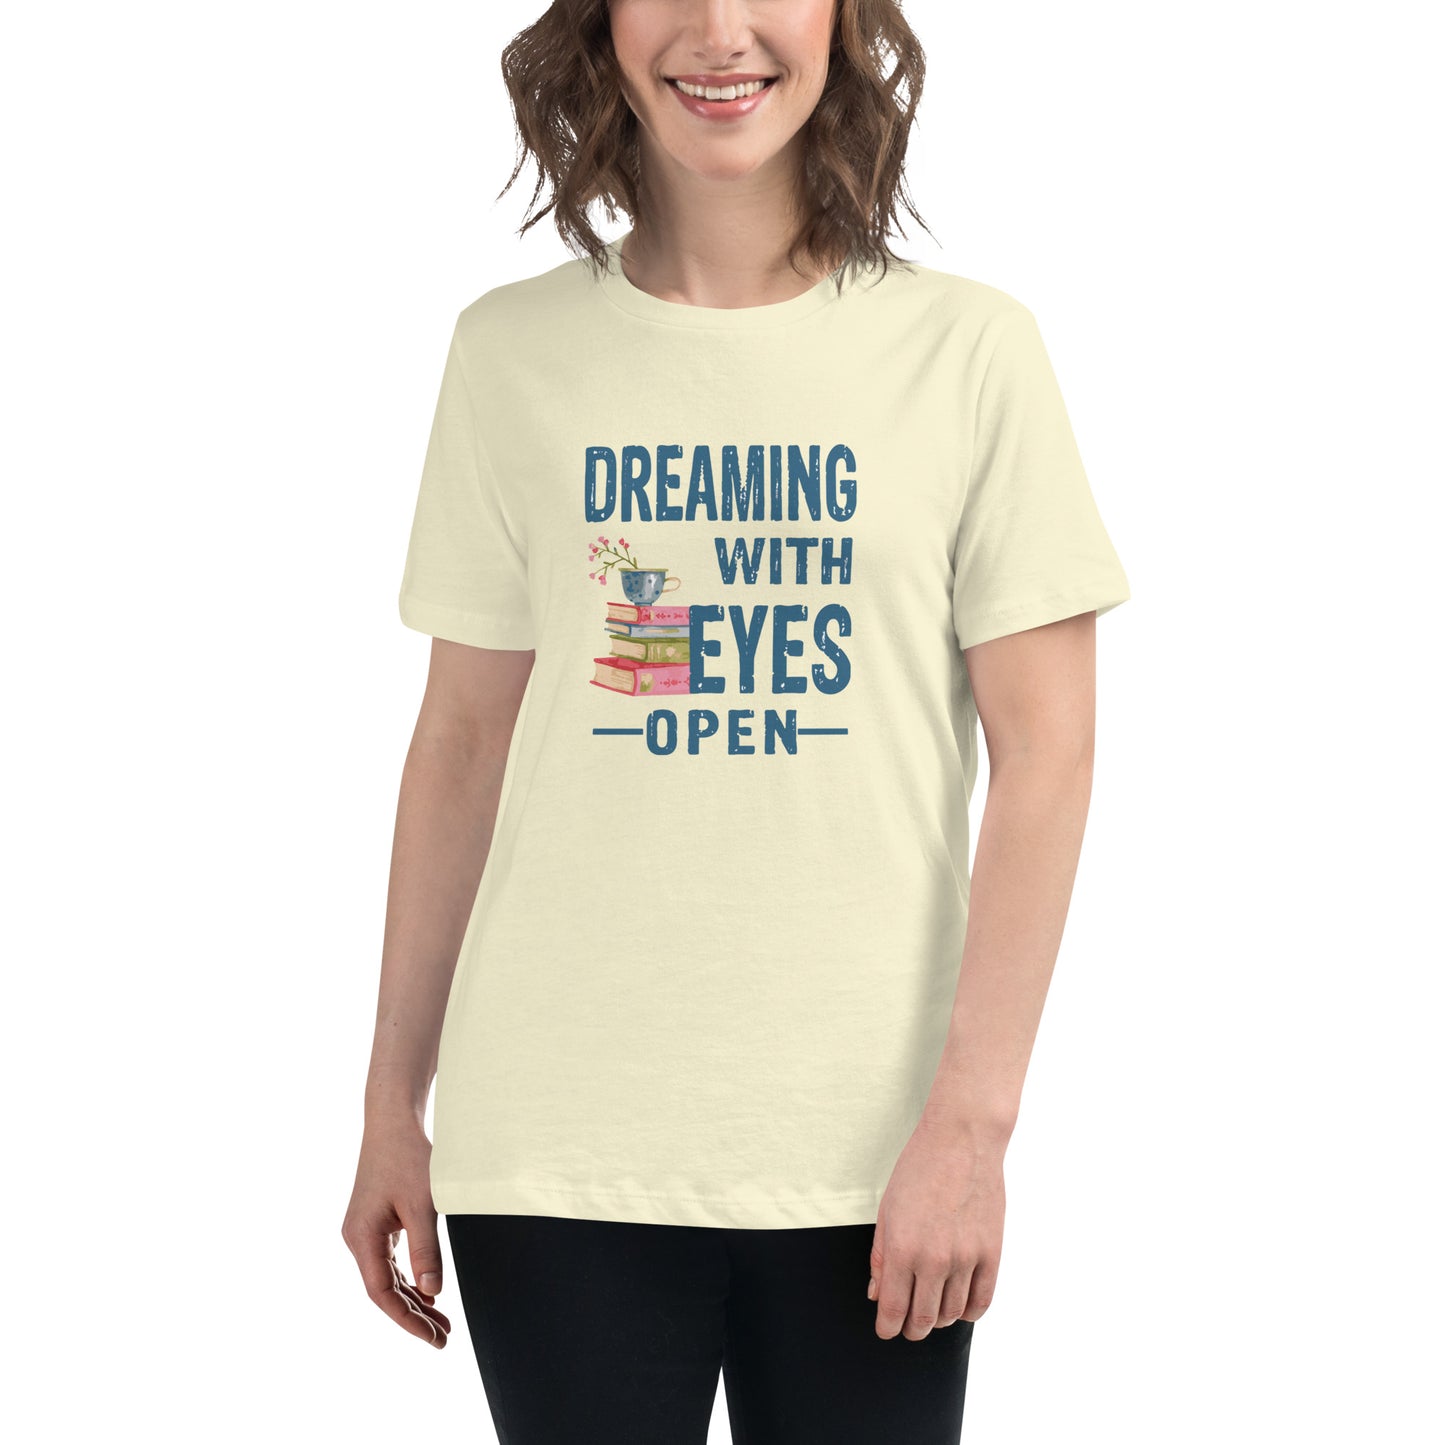 Dreaming with eyes open